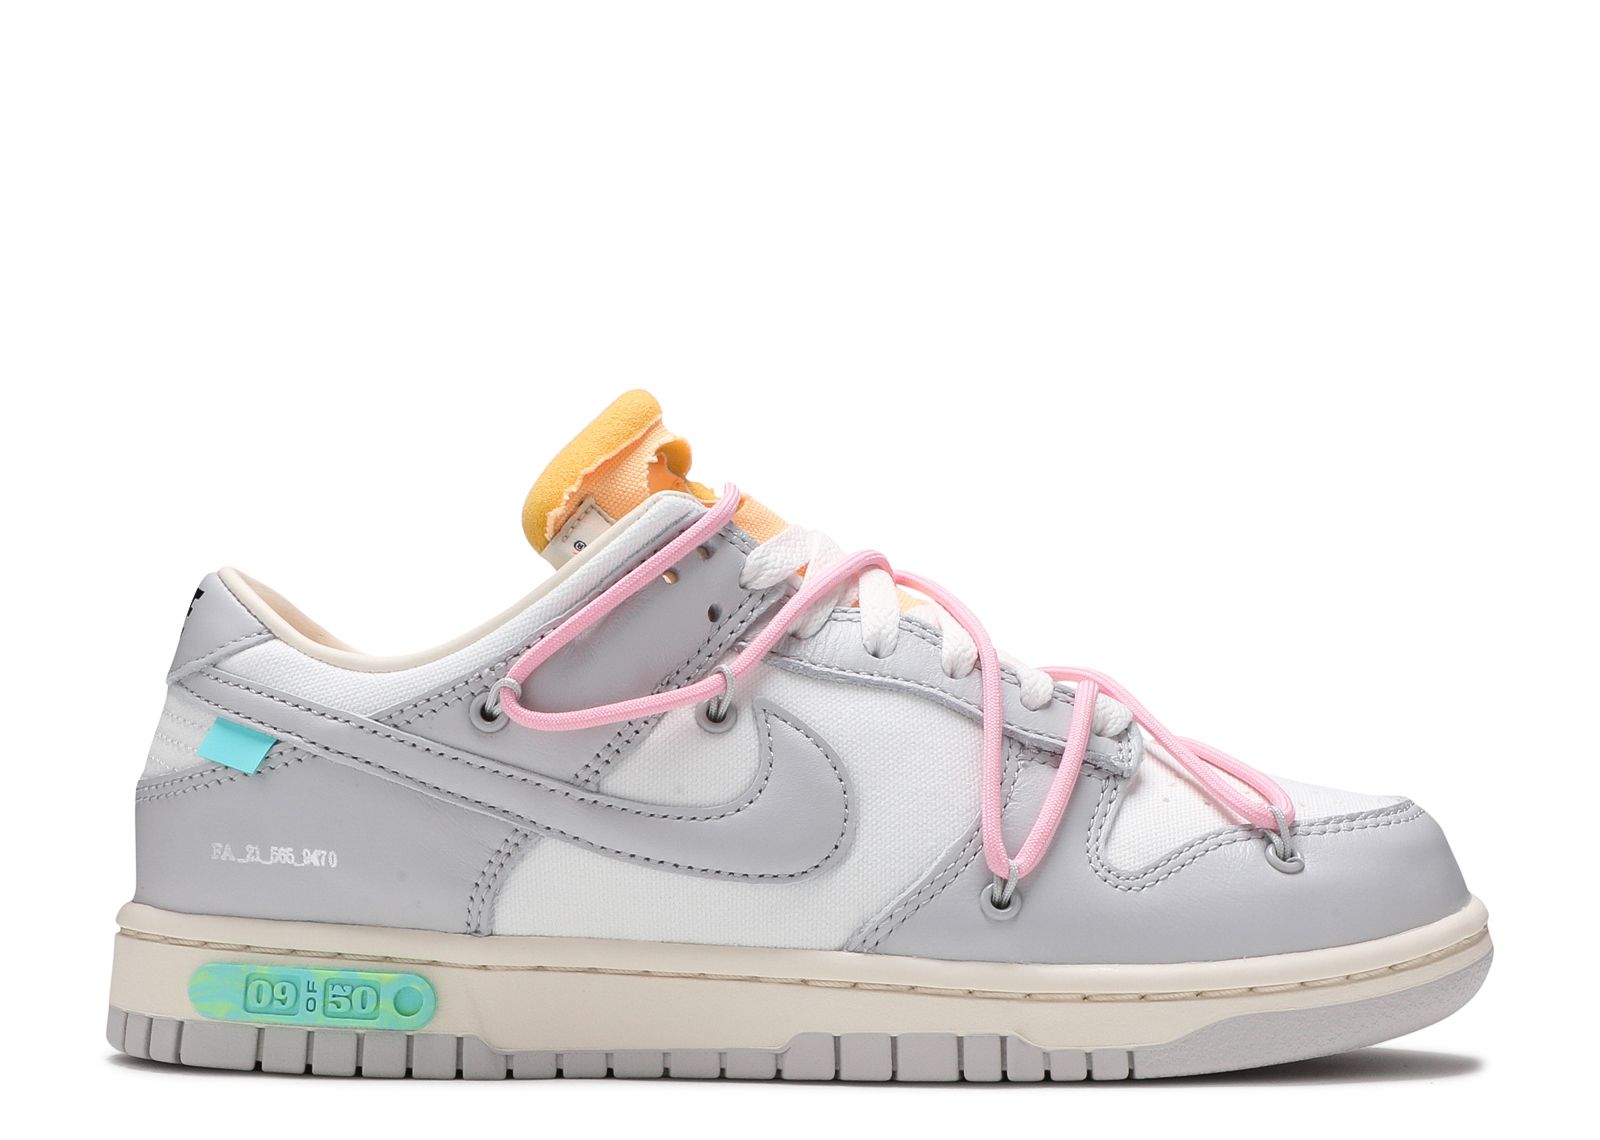 OFF-WHITE NIKE DUNK LOW OF 50 